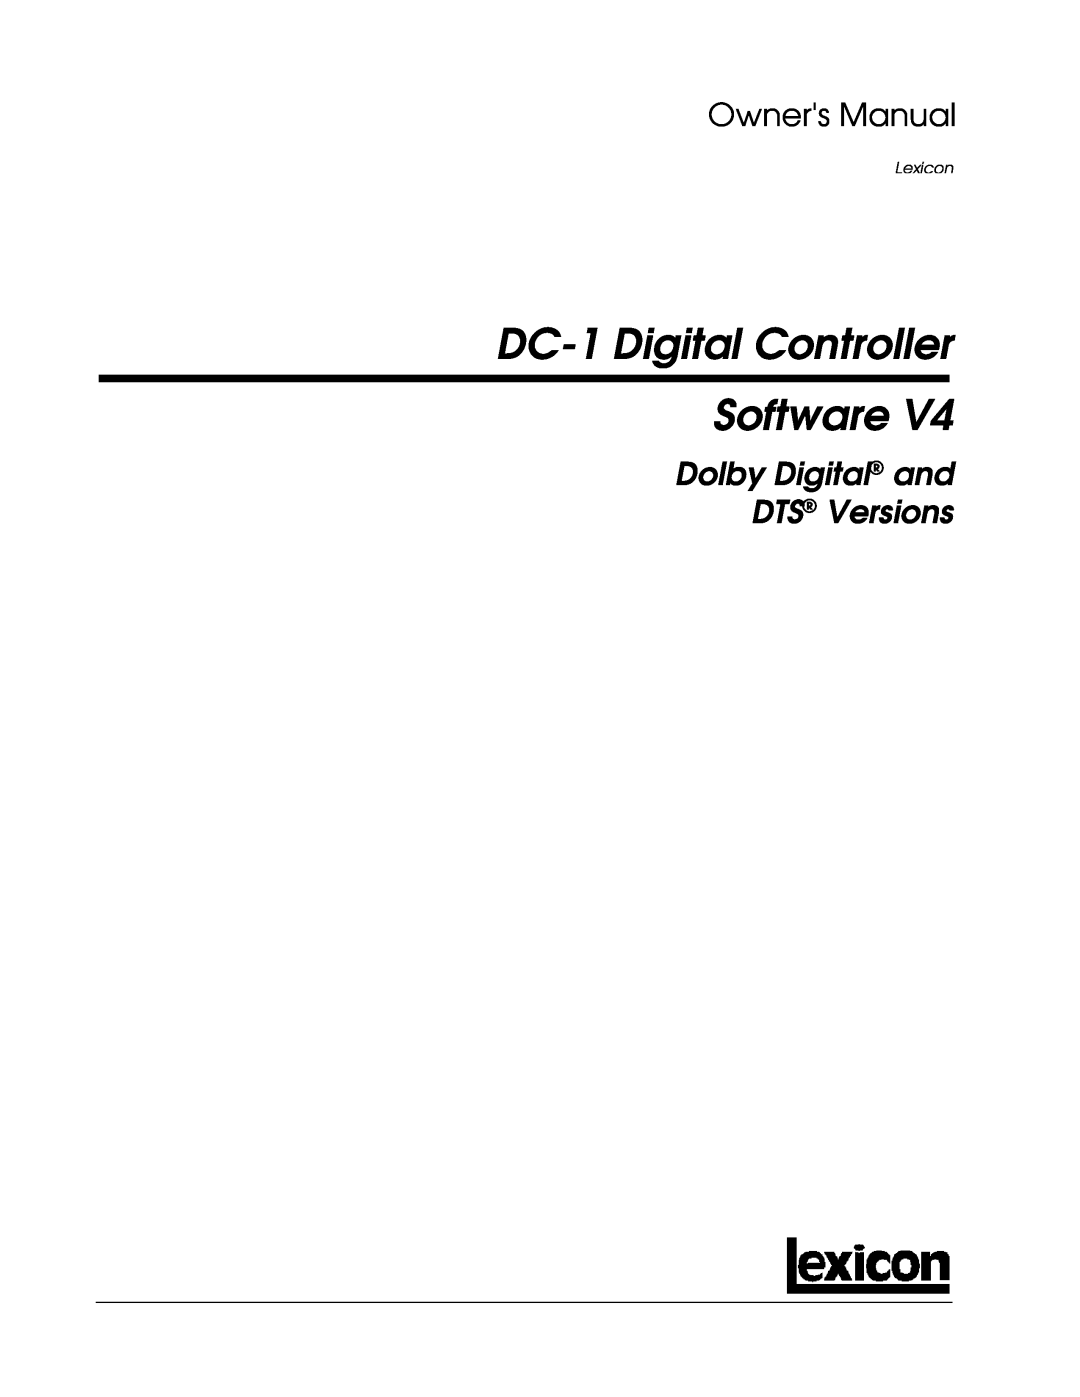 Lexicon Lexicon Part #070-13234 owner manual DC-1Digital Controller Software, Dolby Digital and DTS Versions 